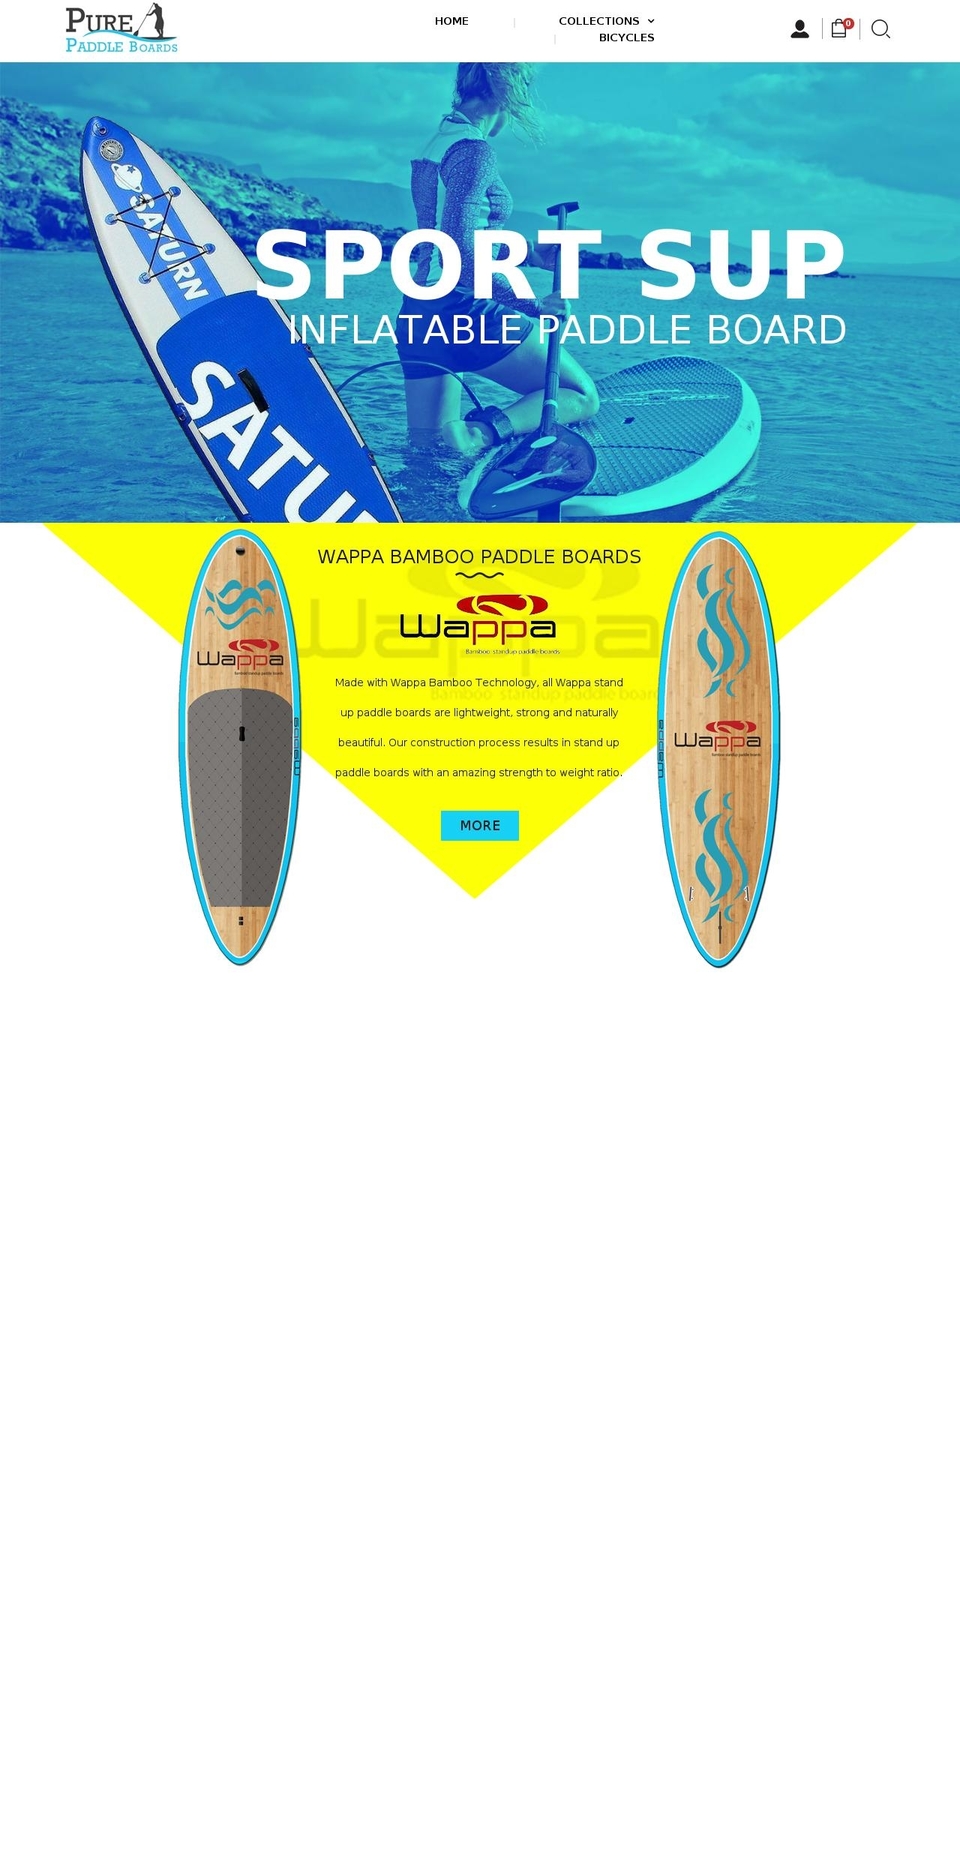 VertexDimension Shopify theme site example purepaddleboards.com